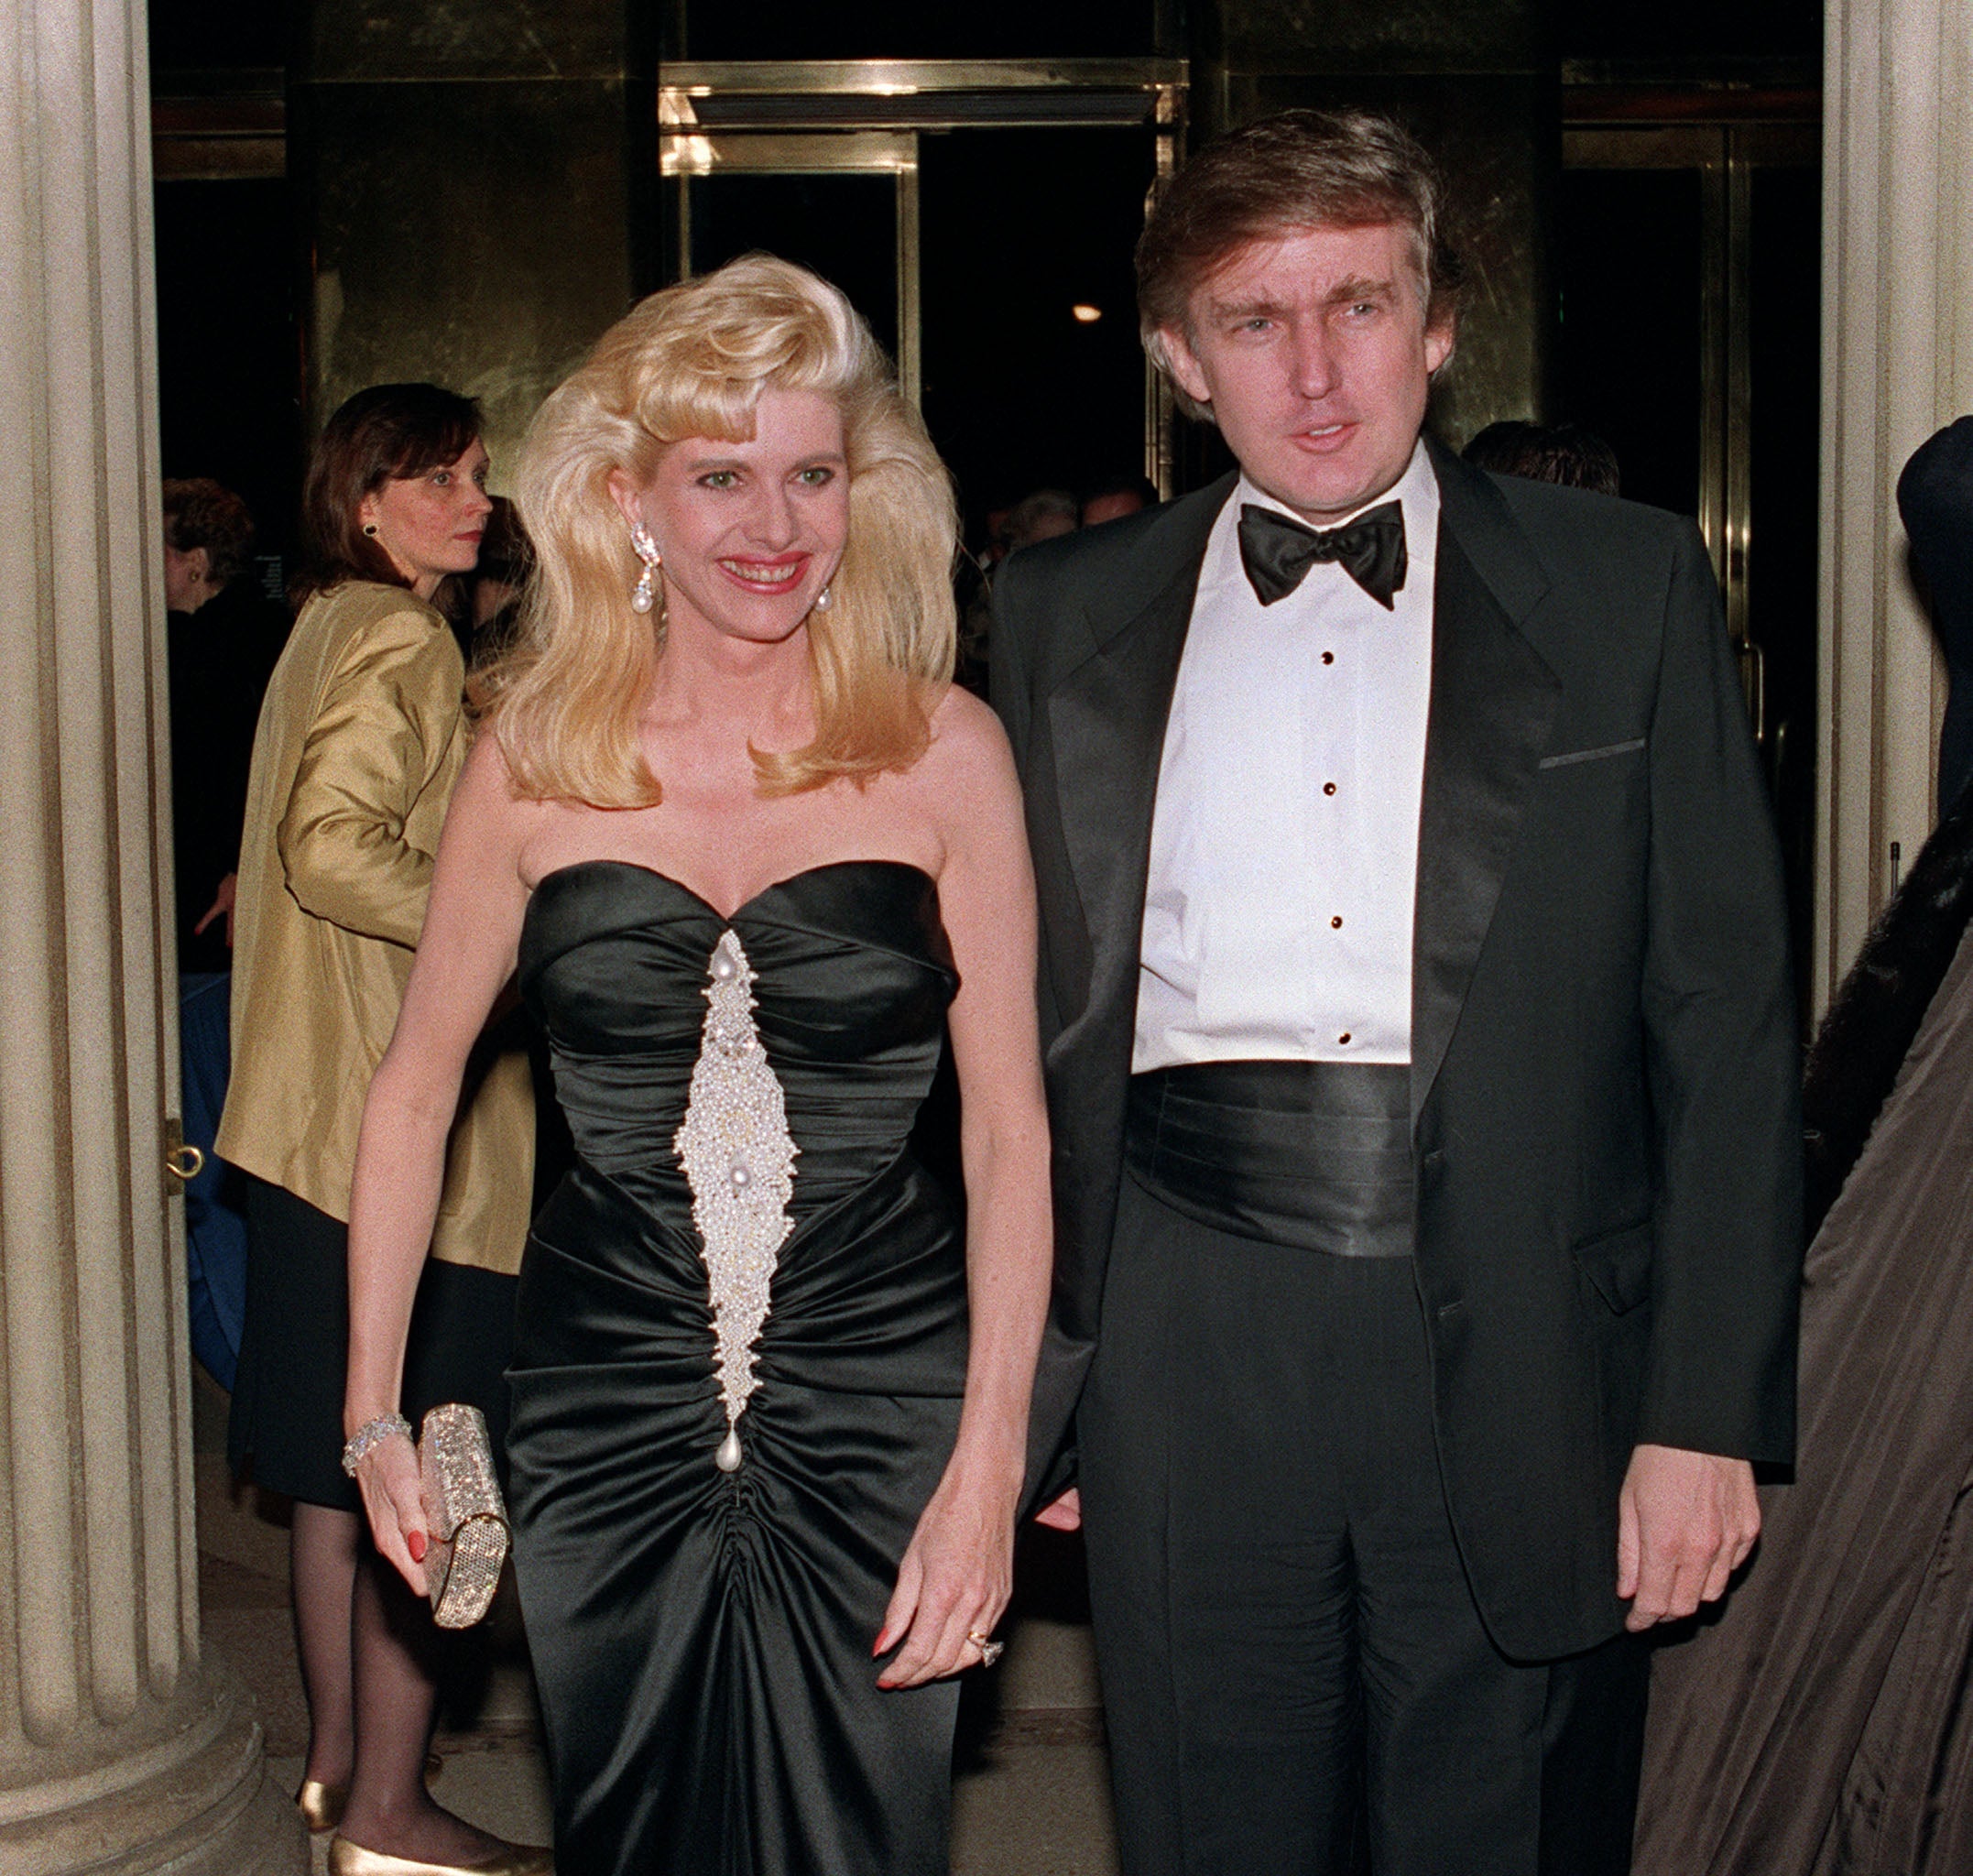 Trump with his first wife in the 1980s, when he wrote and published "The Art of the Deal."